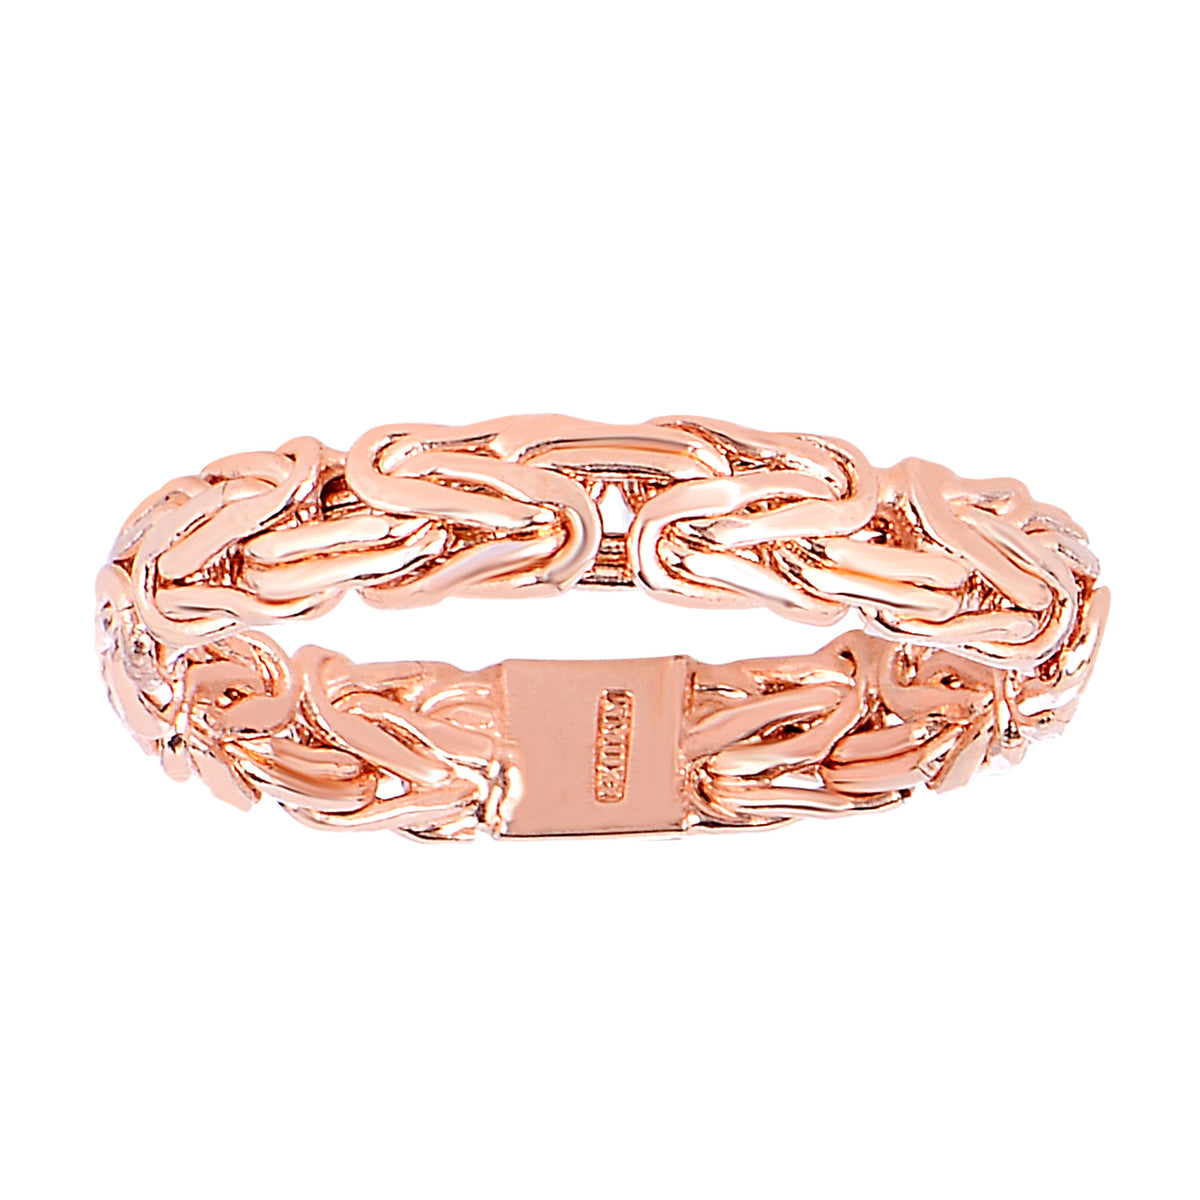 14Kt Rose Gold Byzantine Style Band - 4mm Wide fine designer jewelry for men and women